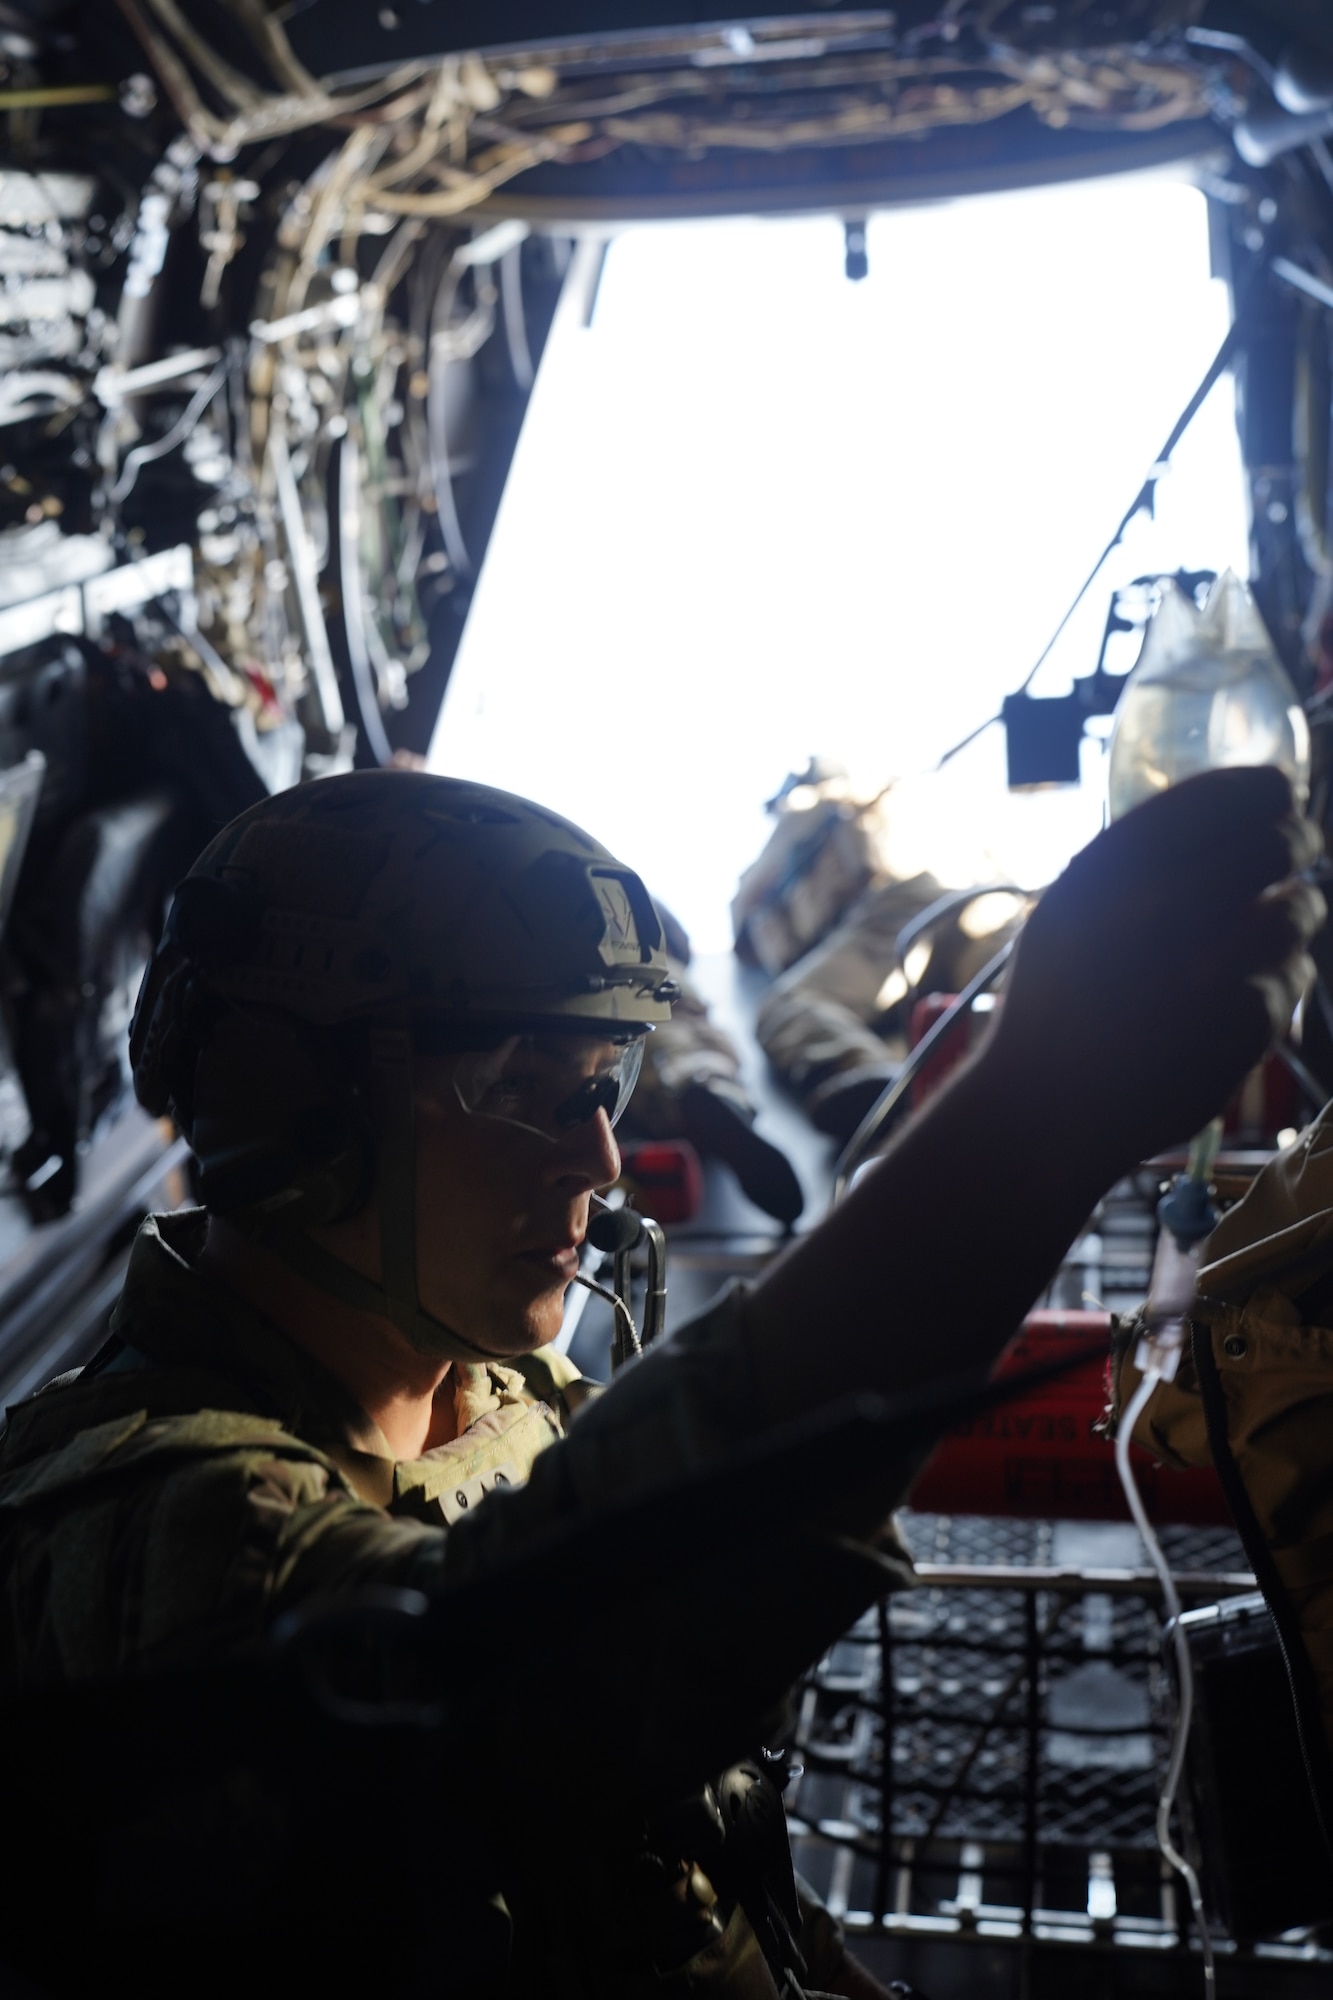 Staff Sgt. Codie White, 353rd Special Operations Support Squadron special operations independent duty medic, prepares a bag of saline fluids in flight ahead of an open water personnel recovery training scenario off the coast of Okinawa, Japan, Nov. 19, 2020.